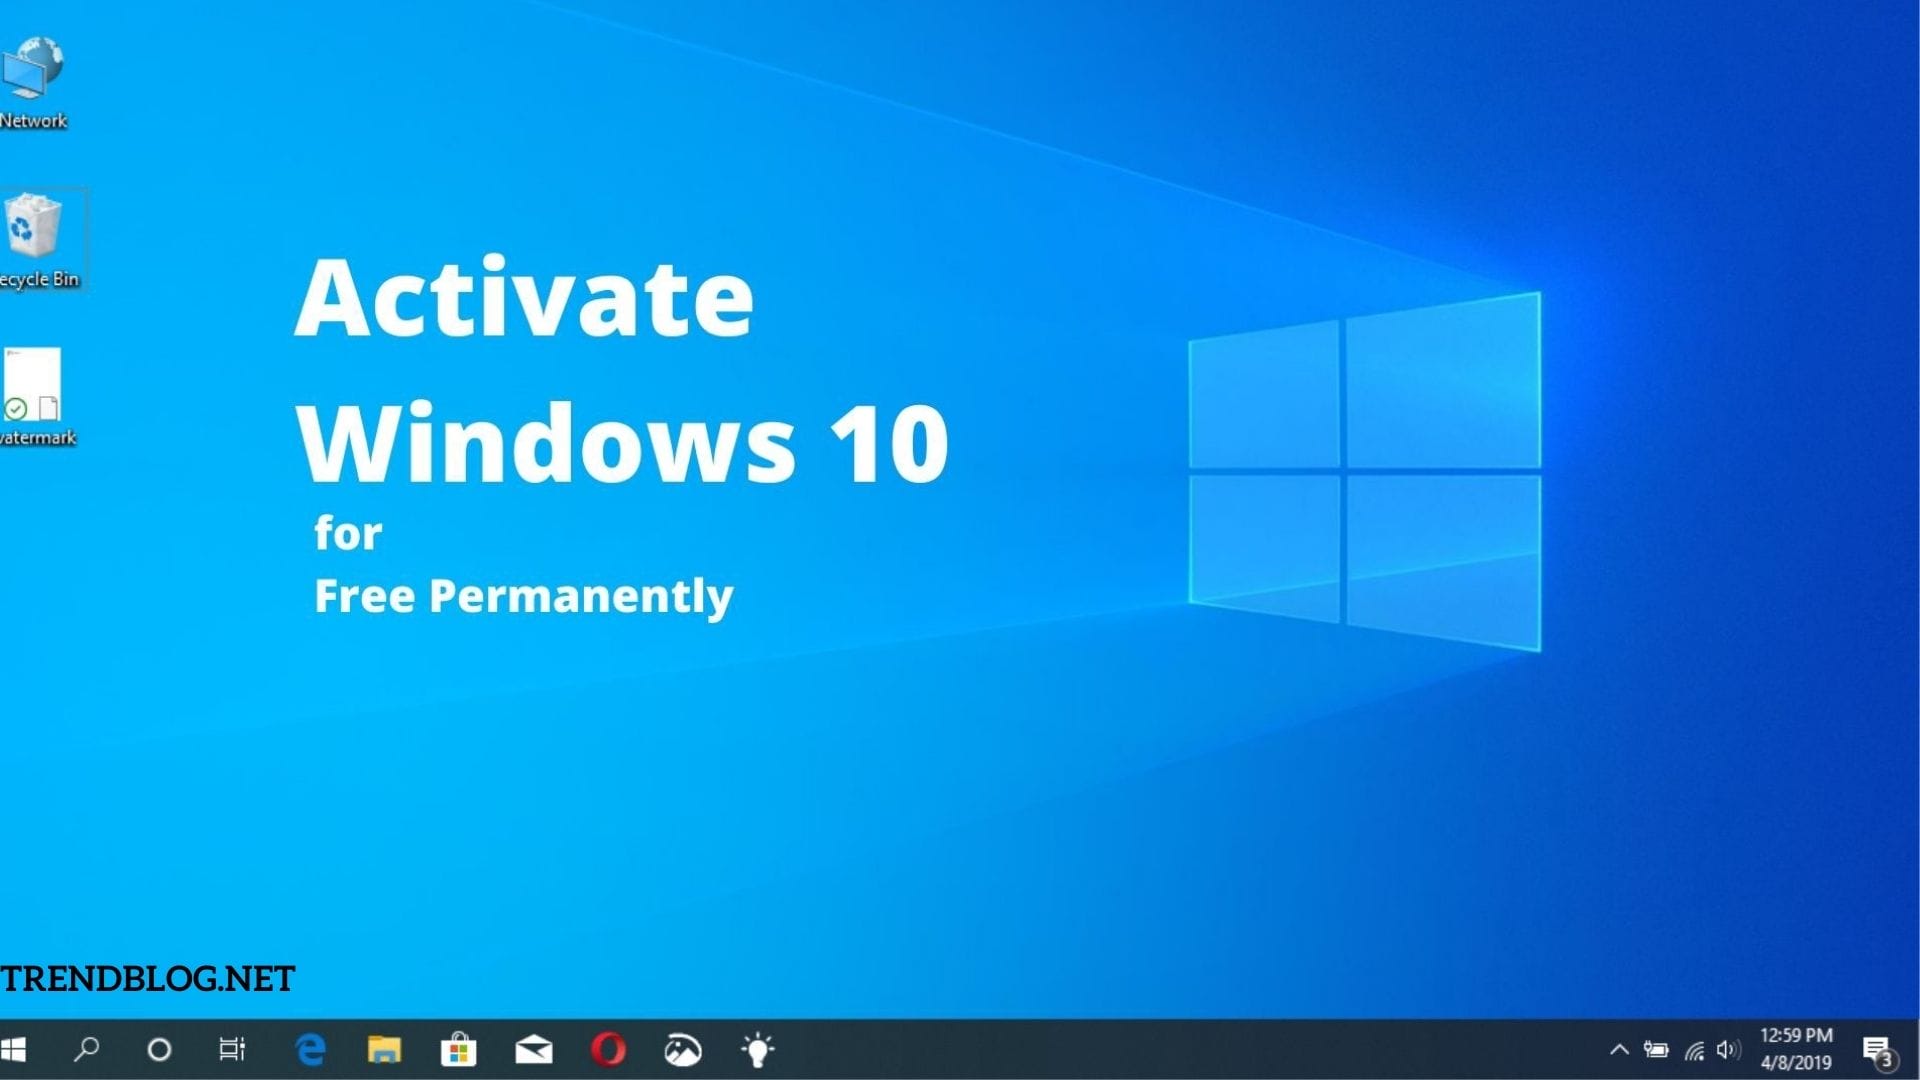  2 Methods to Activate Windows 10 for Free Using Code